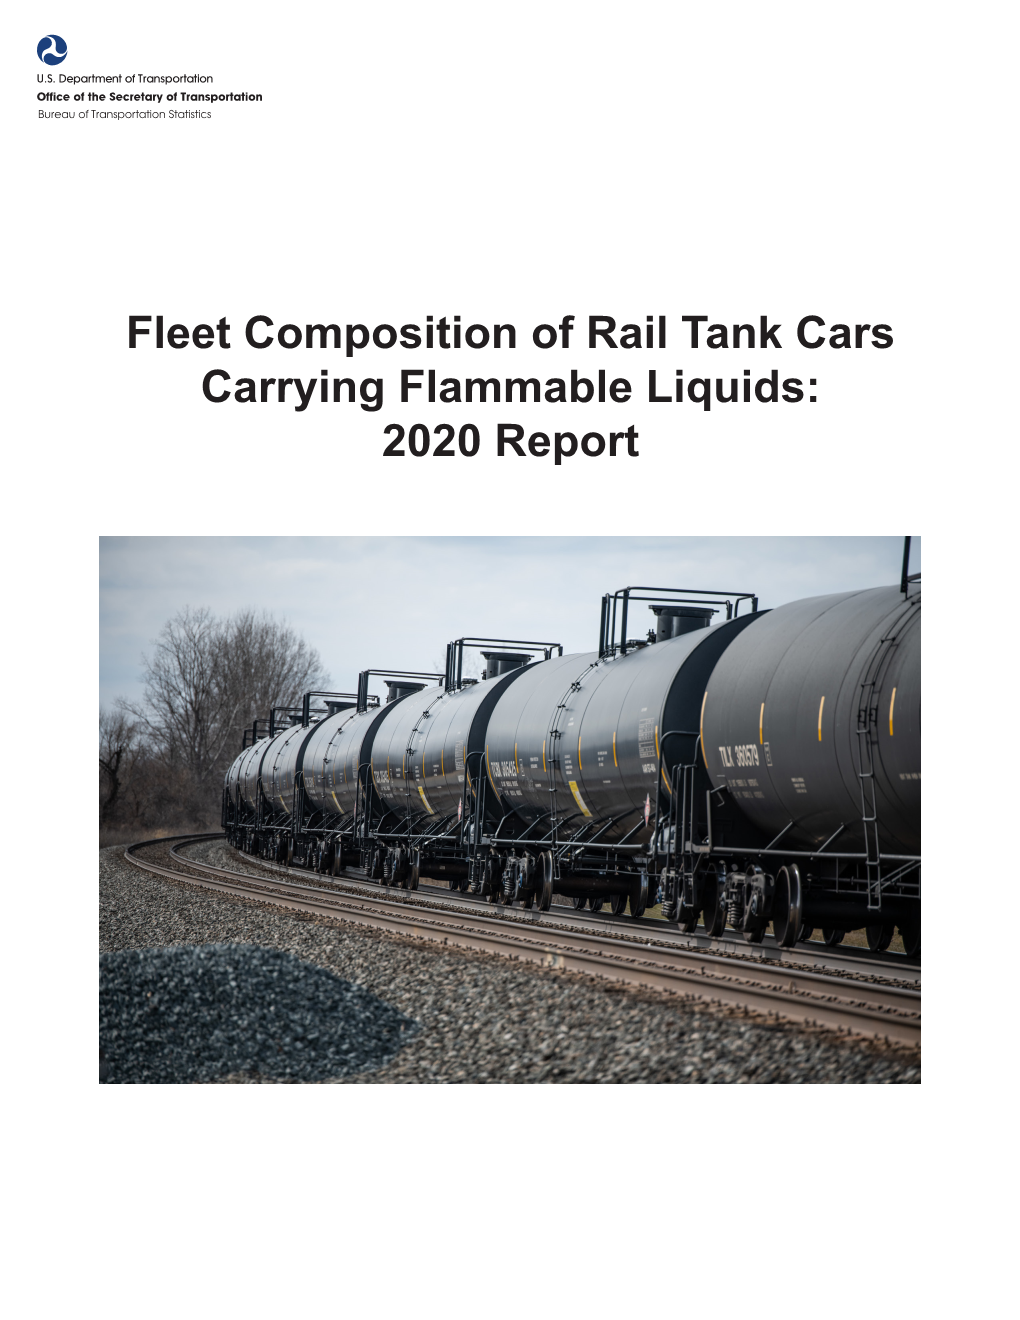 Fleet Composition of Rail Tank Cars Carrying Flammable Liquids: 2020 Report Acknowledgements